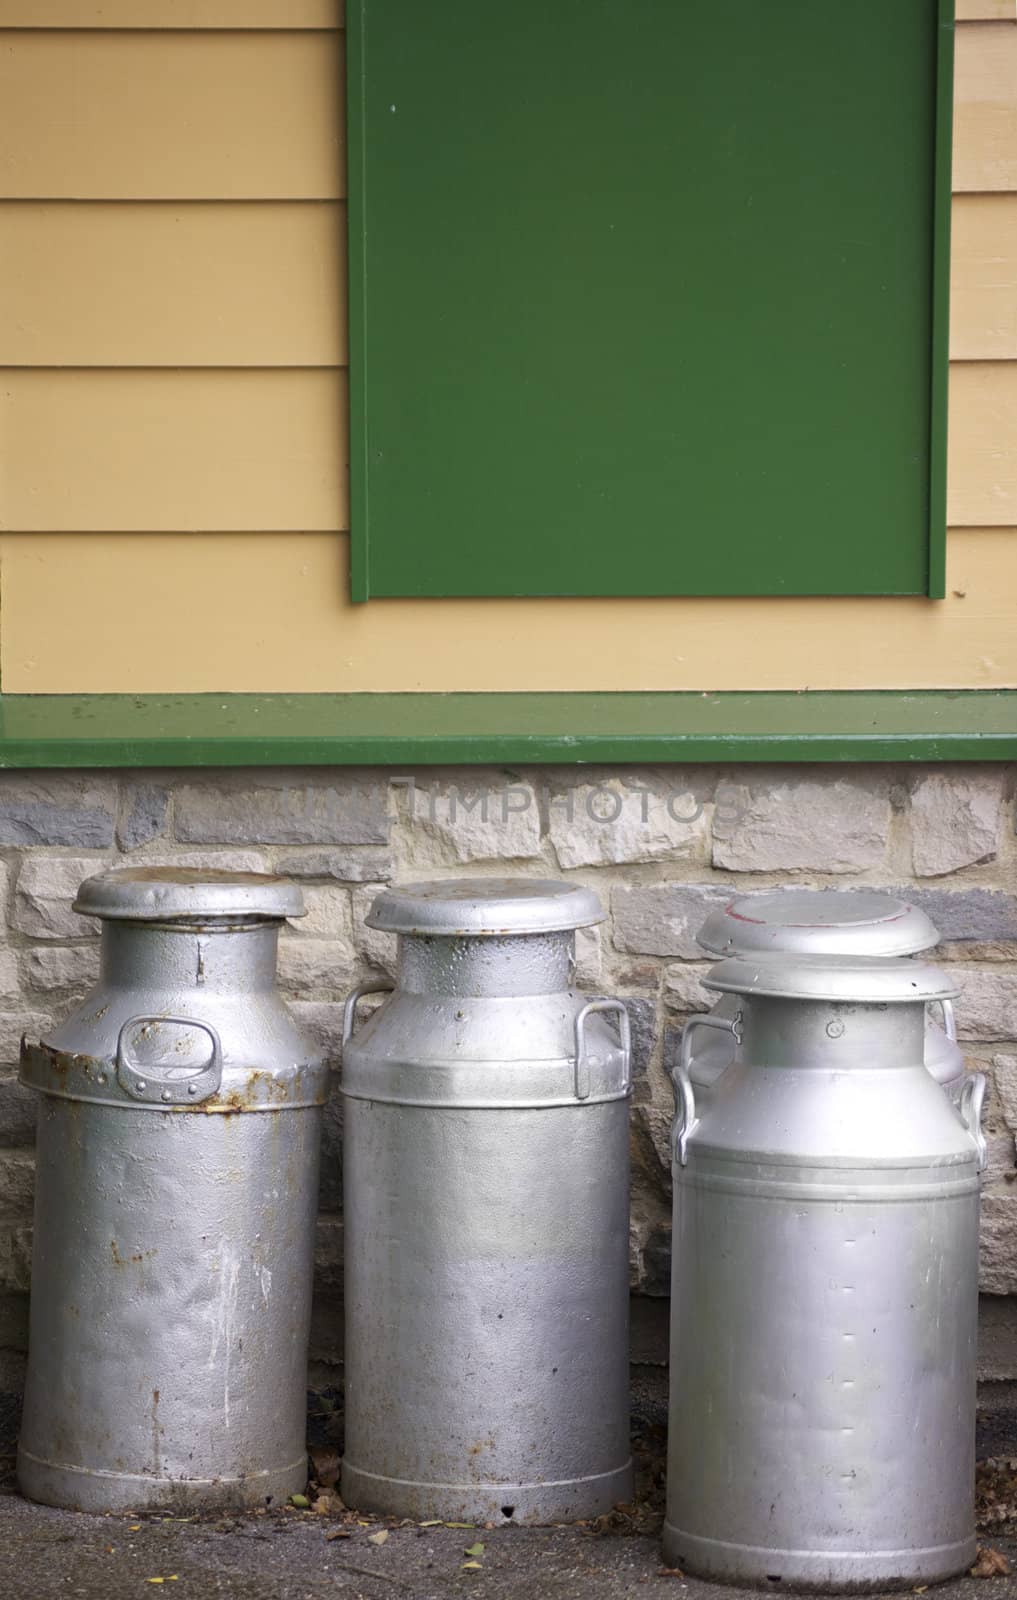 Four old tin and aluminium milk churns set in front of a wooden clad building. Located in an old railway platform in Devon, England. Part of the historical Swanage Railway system.